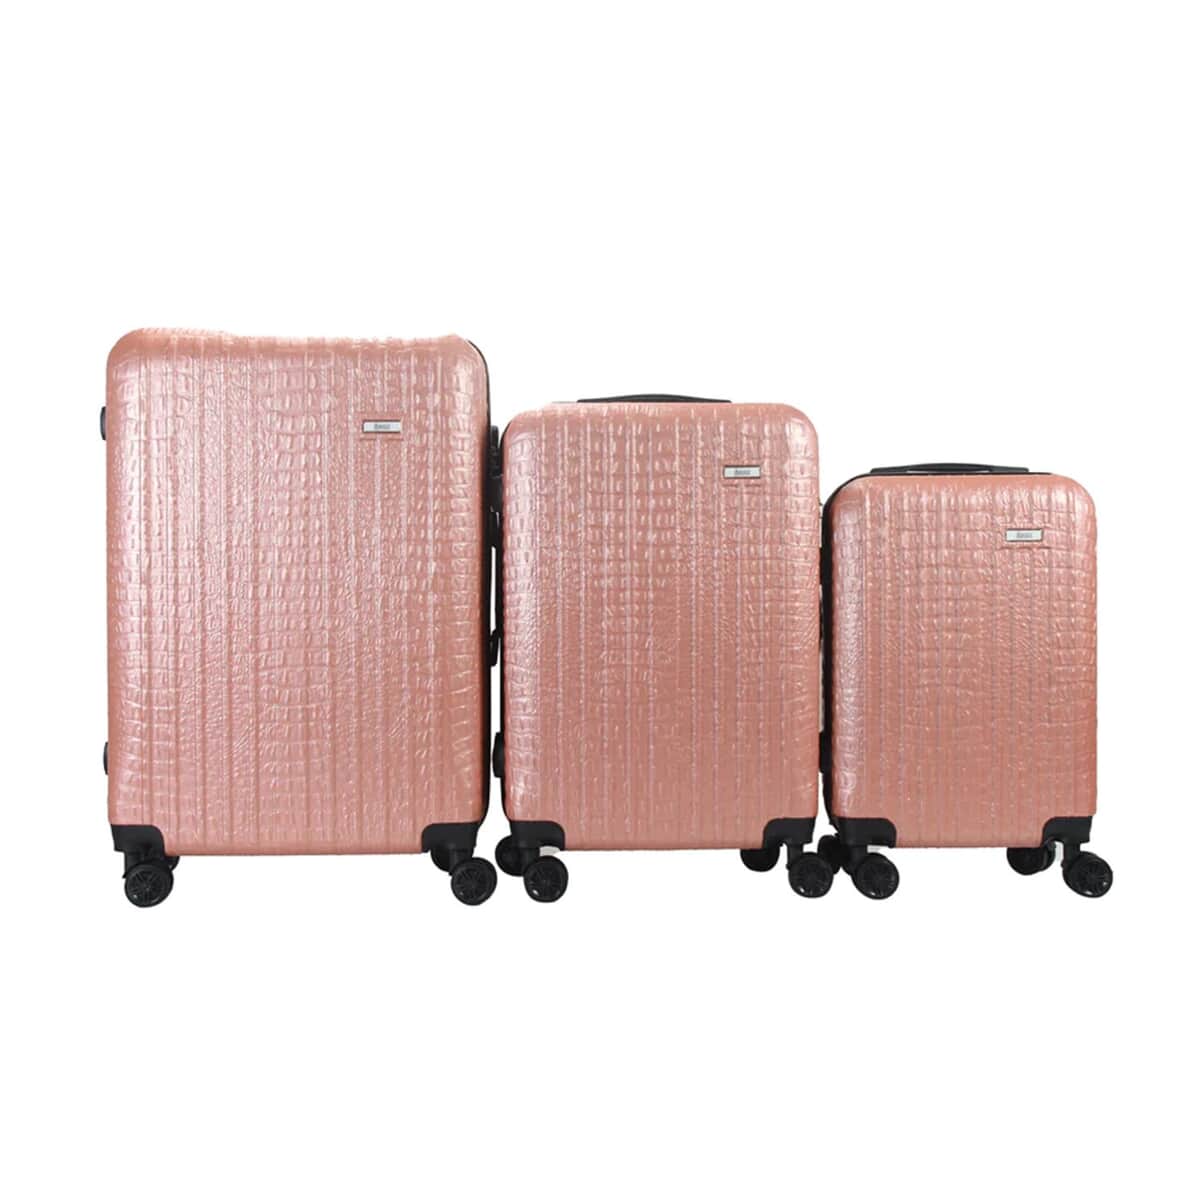 Mirage- Eileen 3 Piece Rose Gold Crocodile Embossed Luggage Set with Dual Spinning Wheels and Combo Lock (28, 24, 20) image number 5